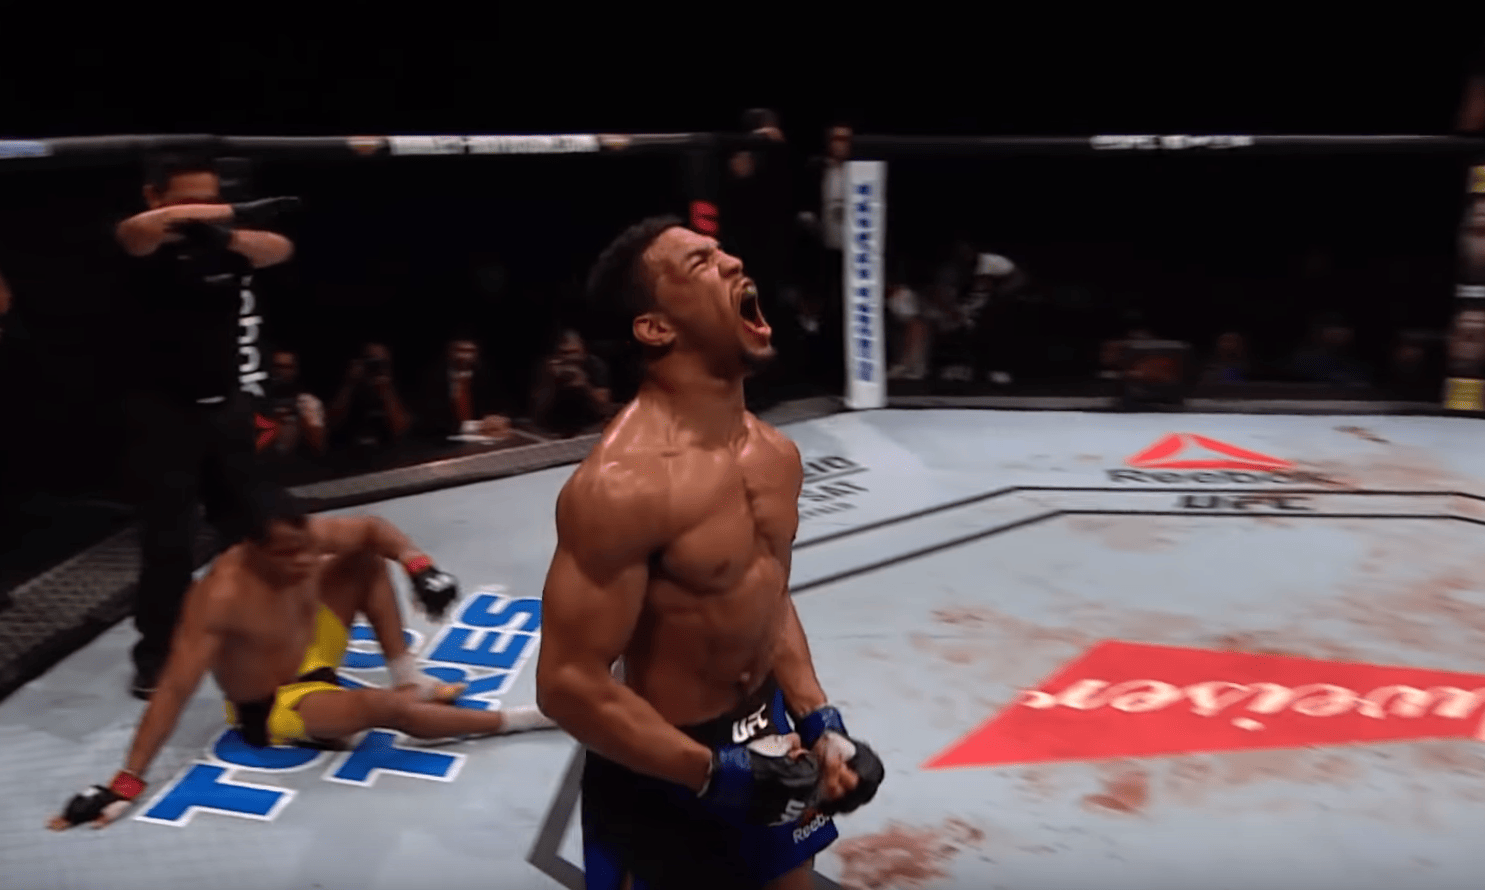 Kevin Lee is moving back down to lightweight and will fight Gregor Gillespie at UFC 244 in New York